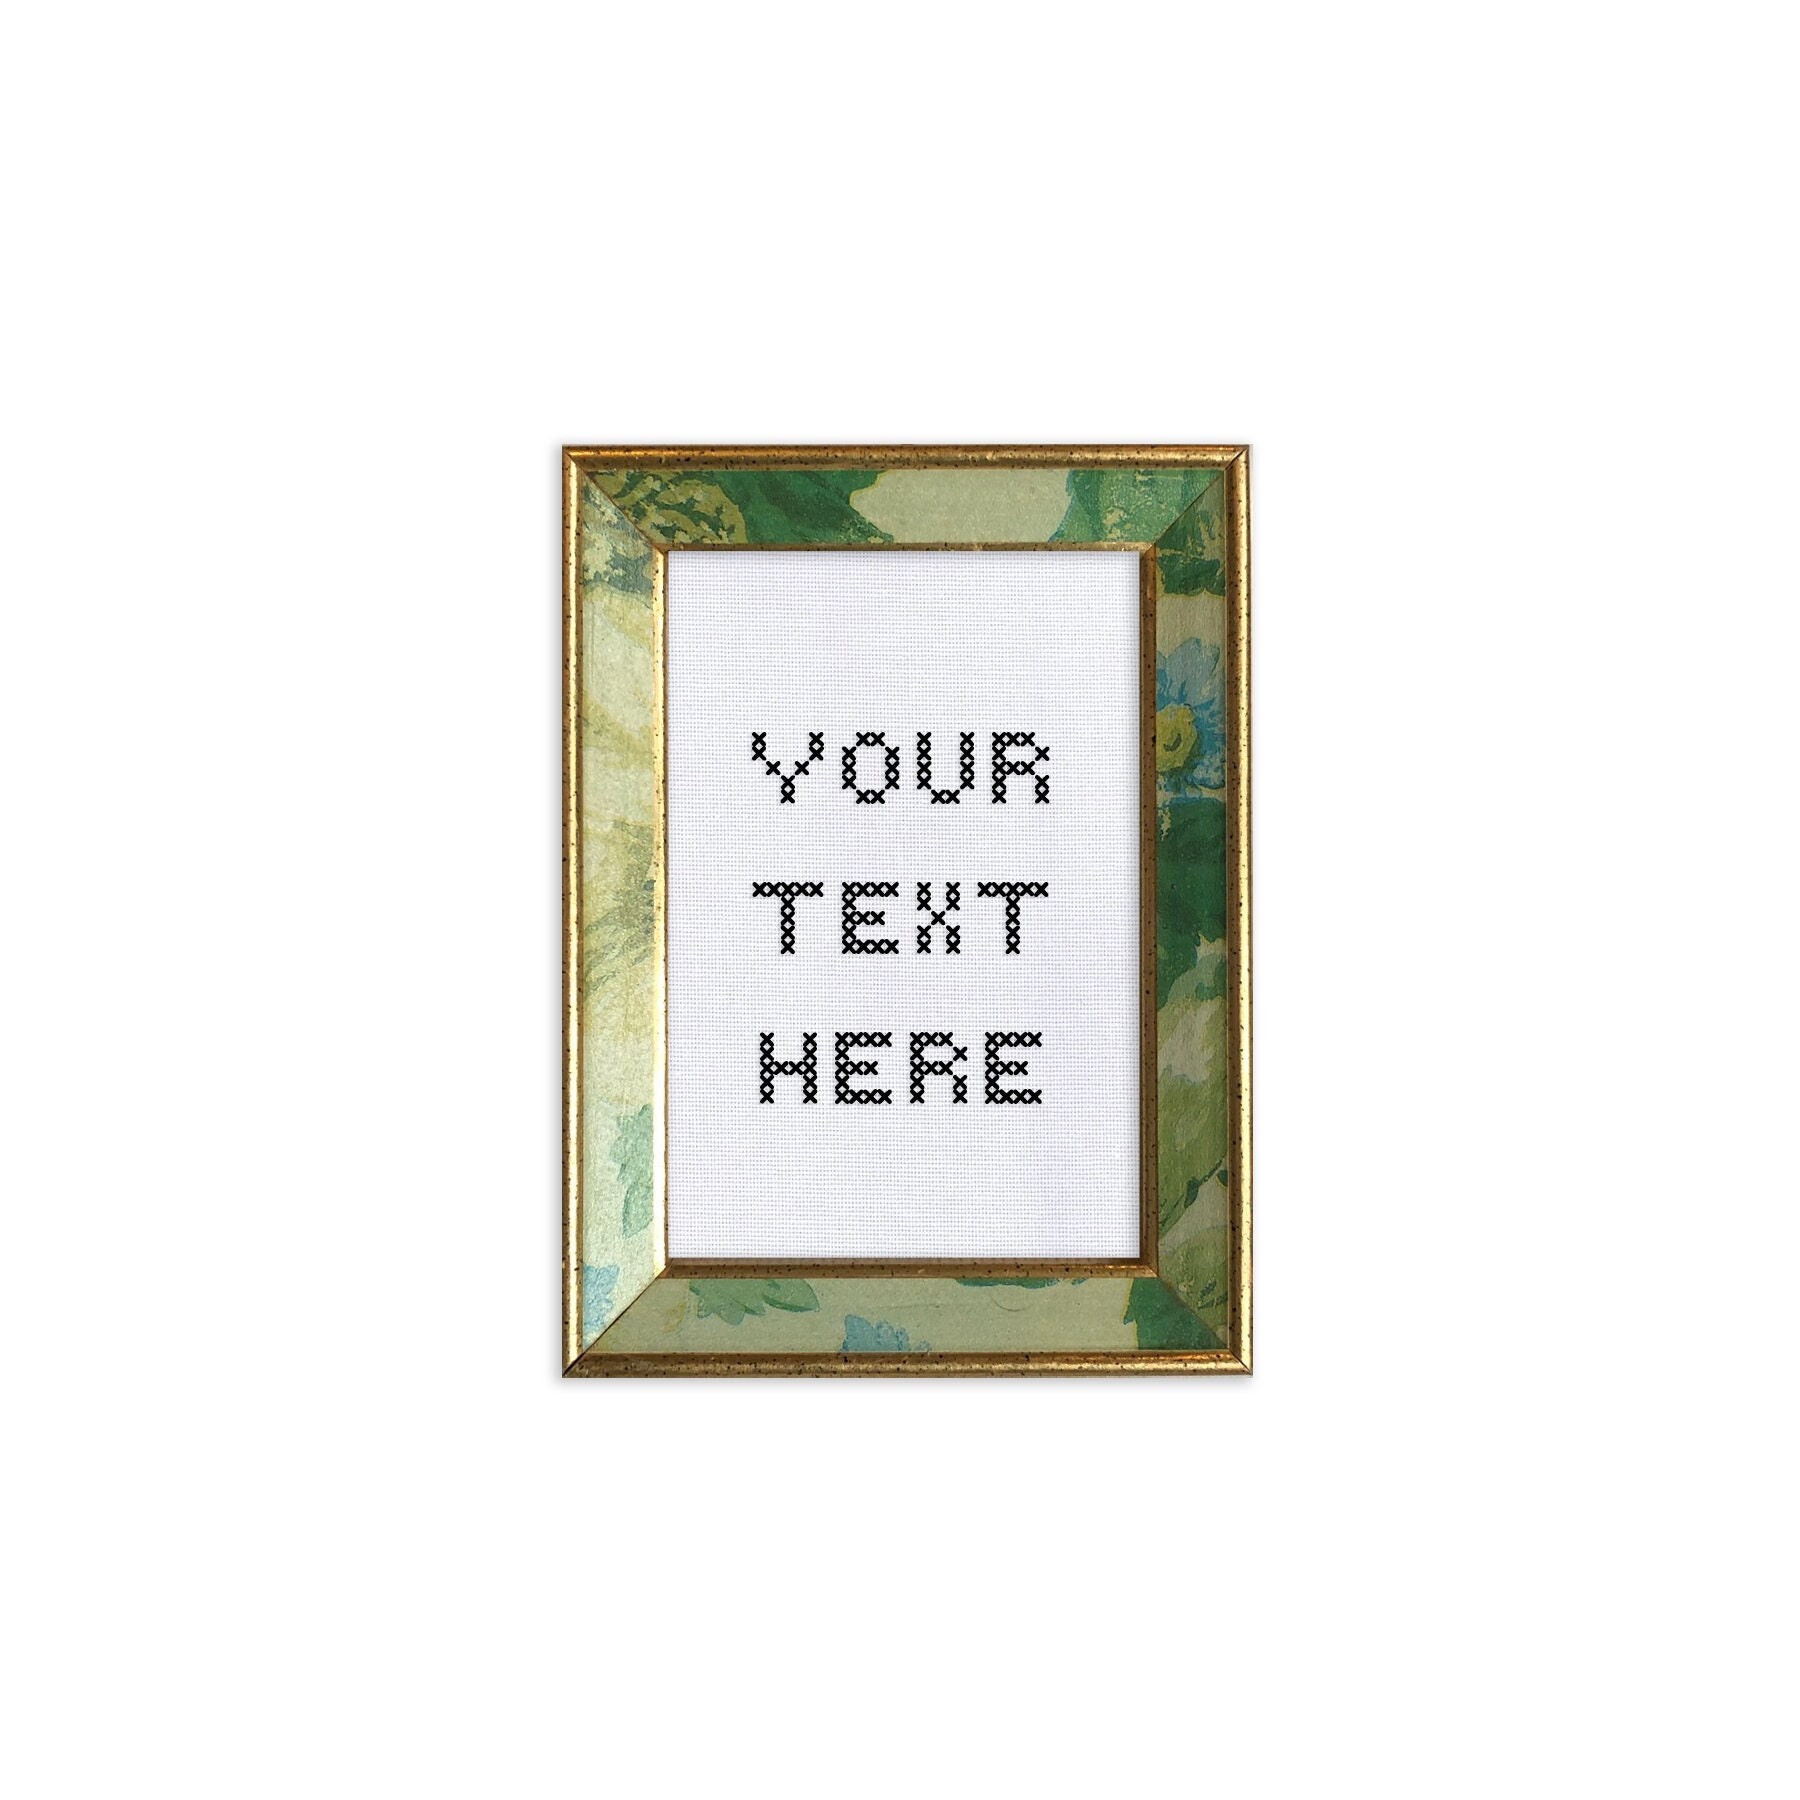 Anything You Can Do I Can Do Bleeding Subversive Finished Framed Cross Stitch